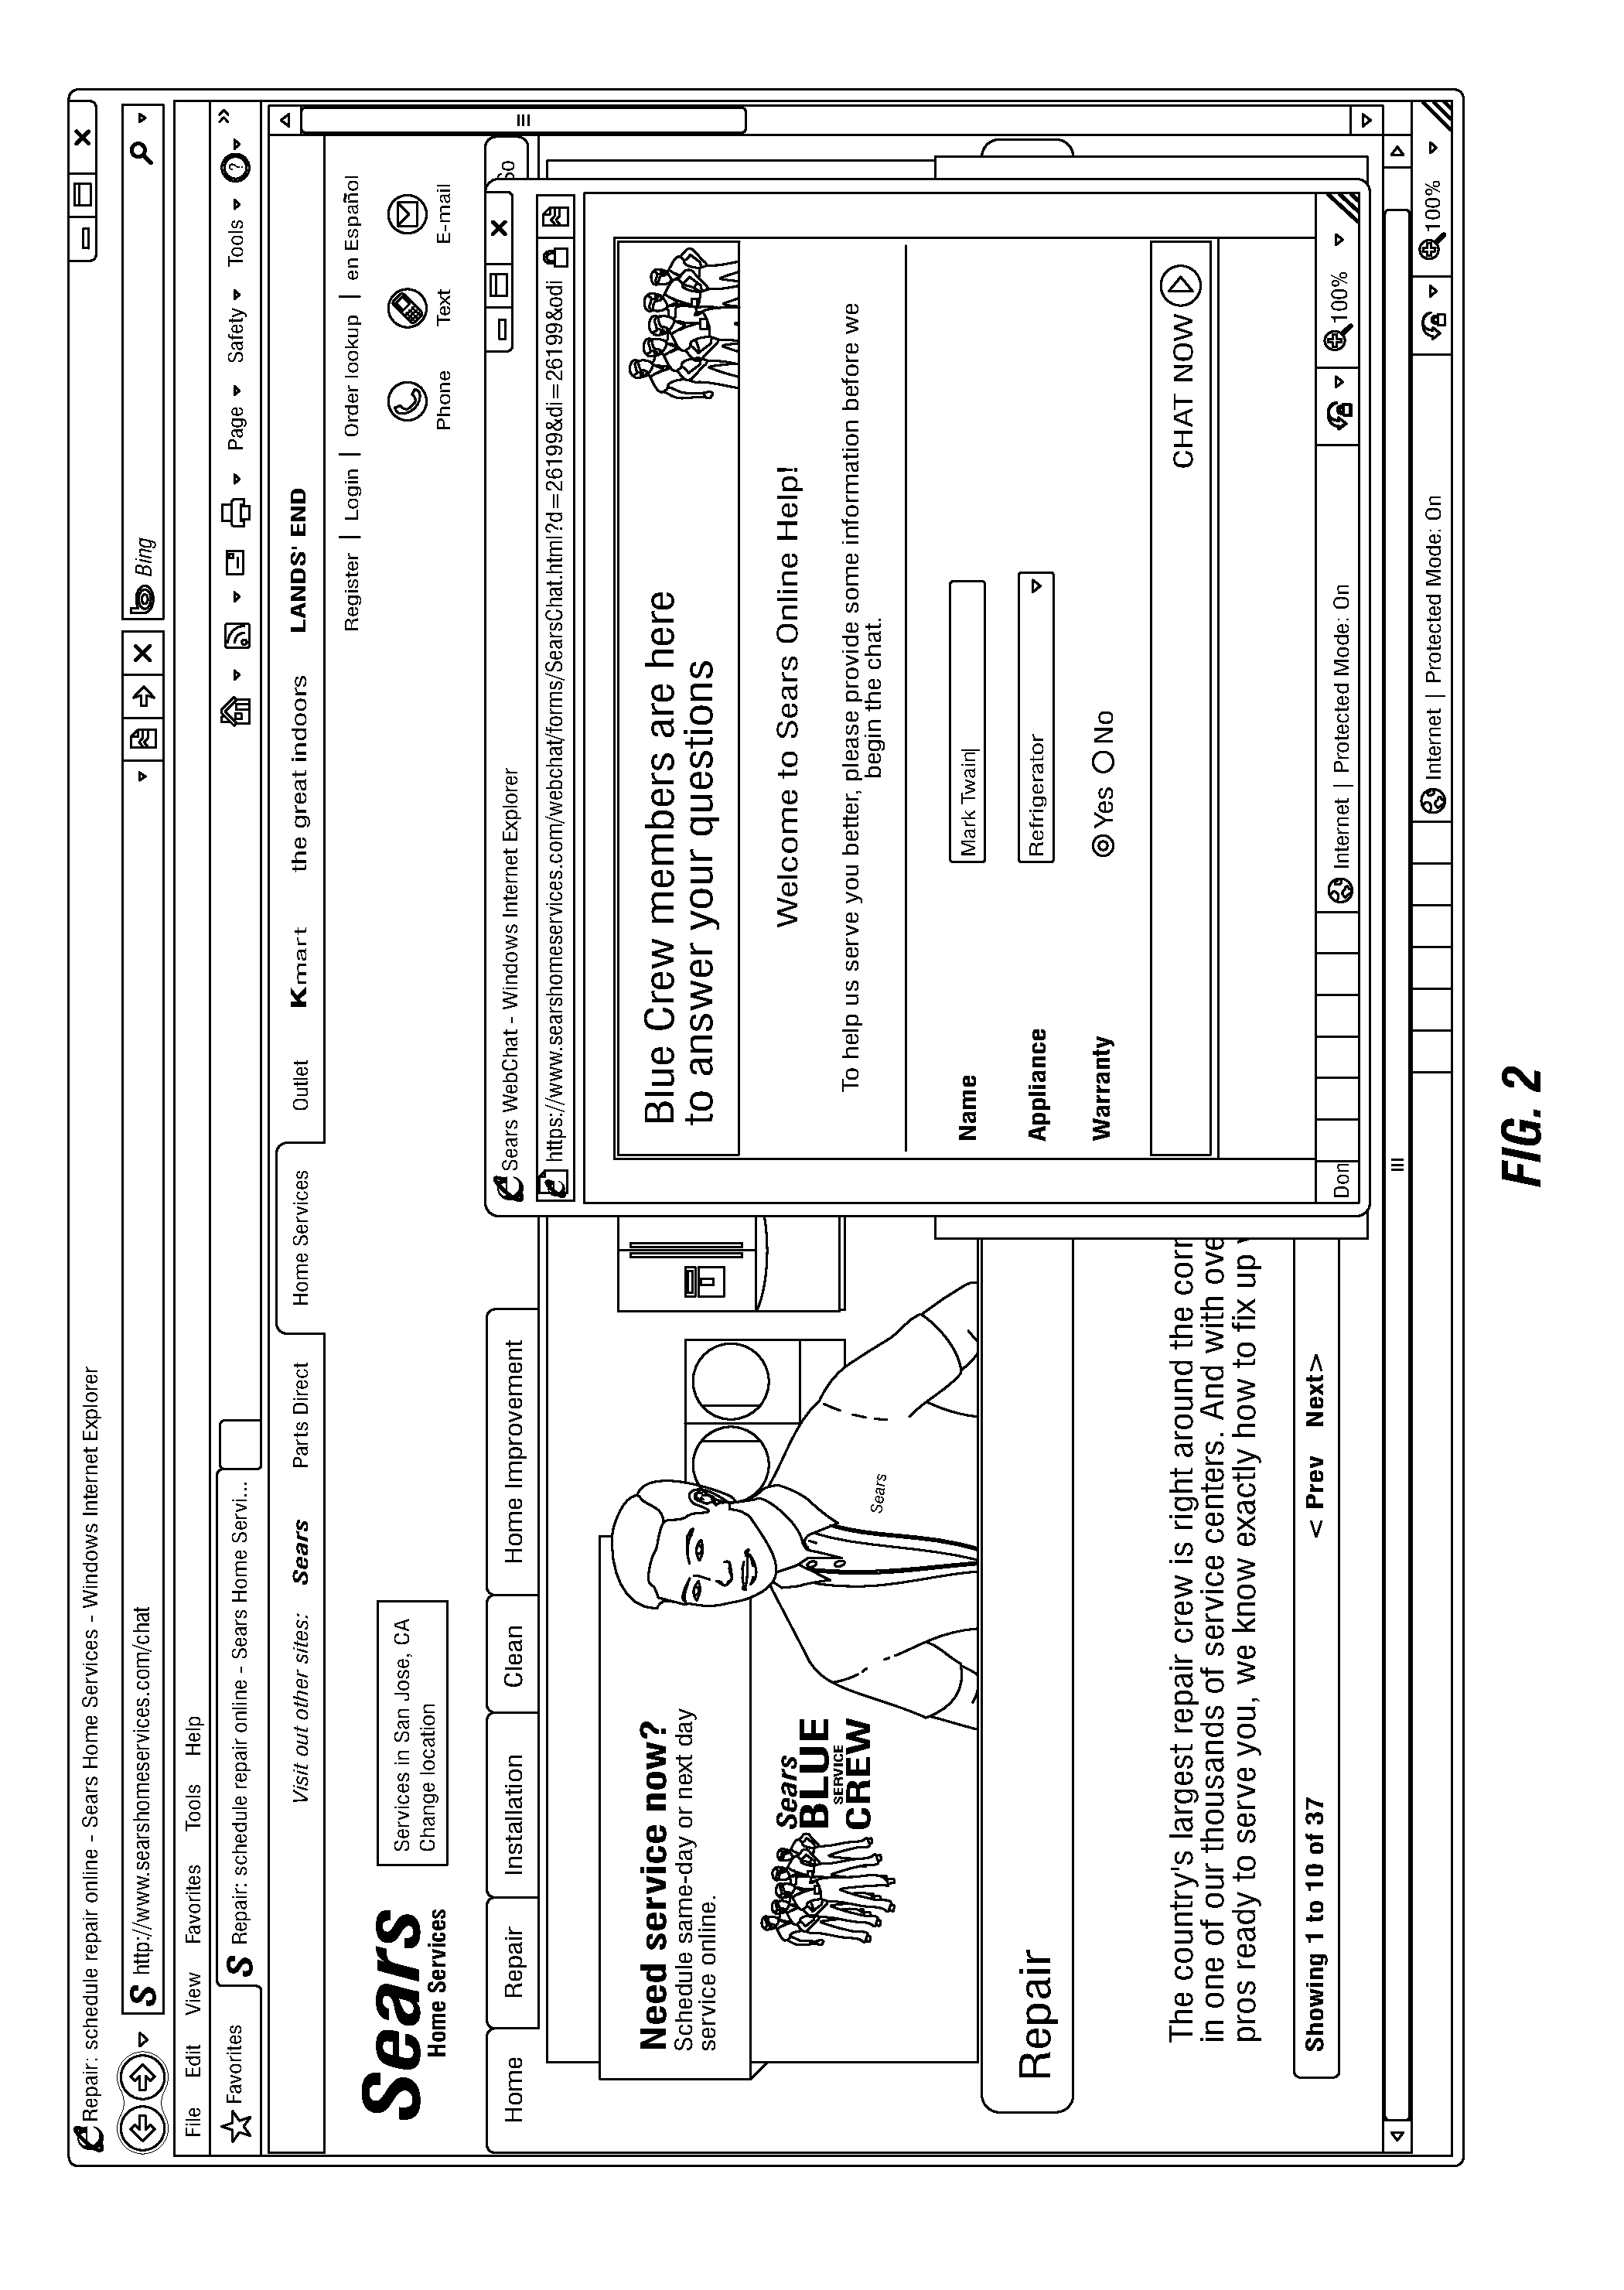 Method and apparatus for optimizing customer service across multiple channels